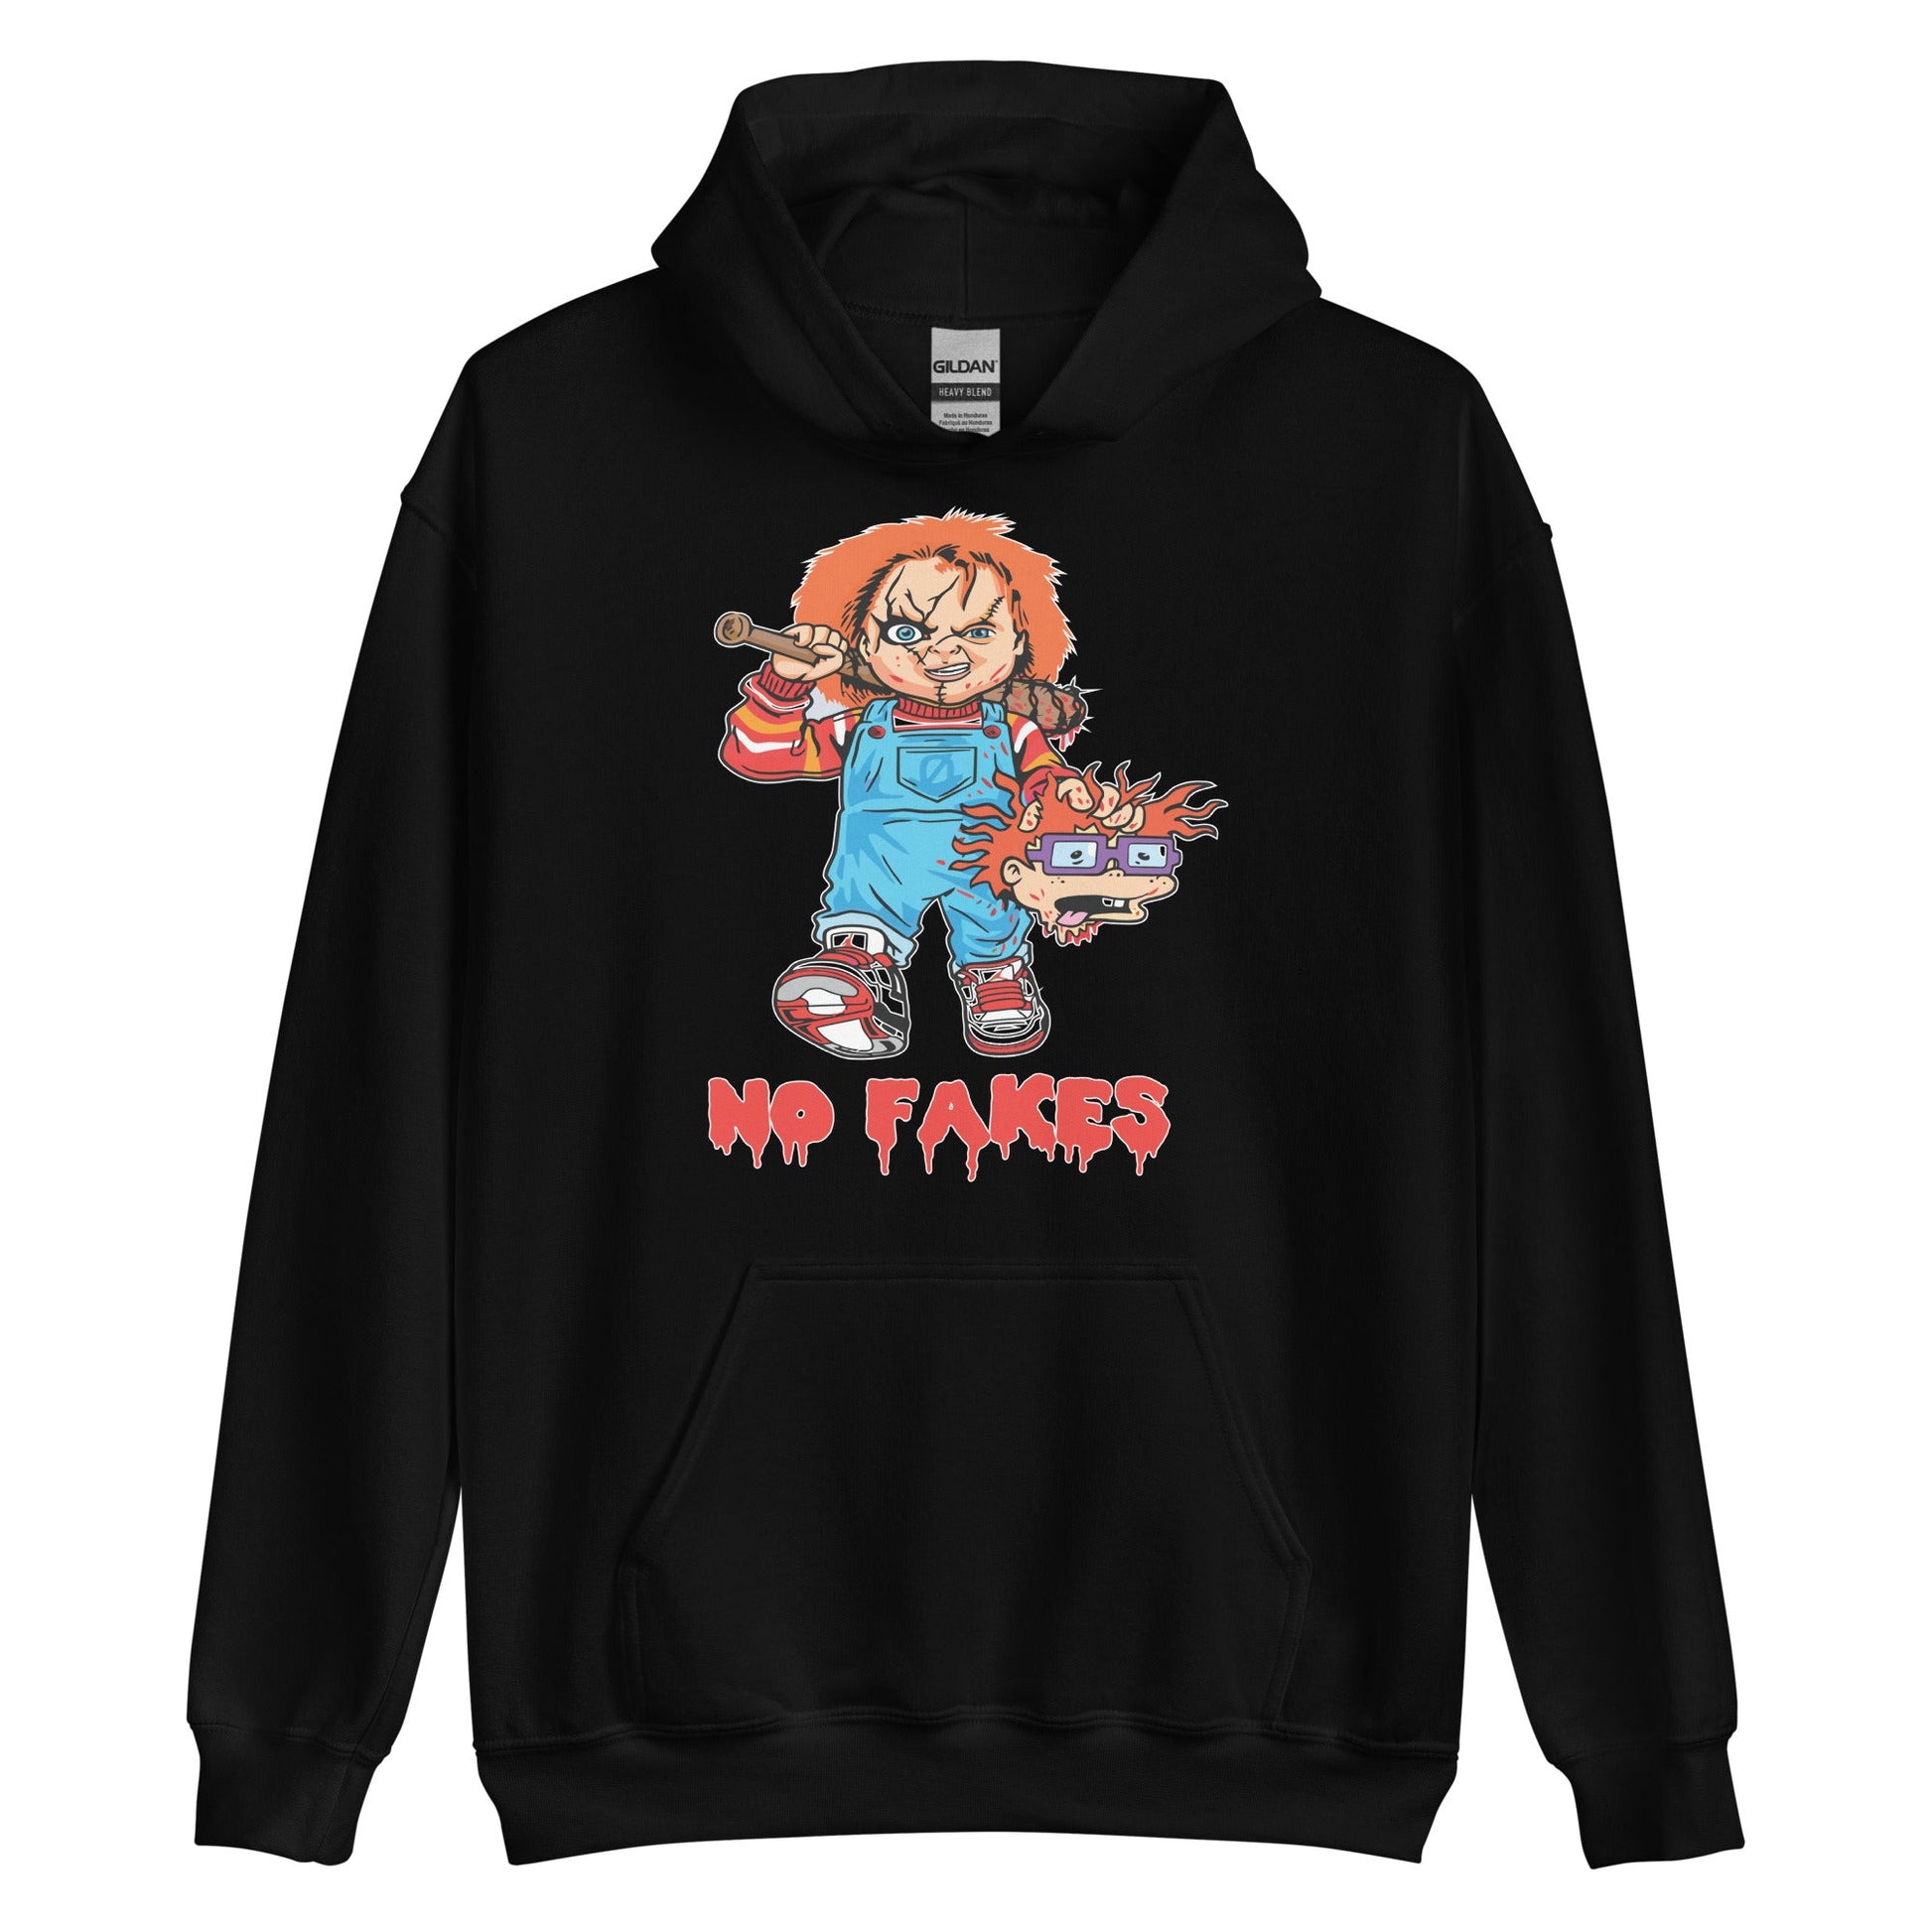 chucky hoodie - no fakes - The Truth Graphics